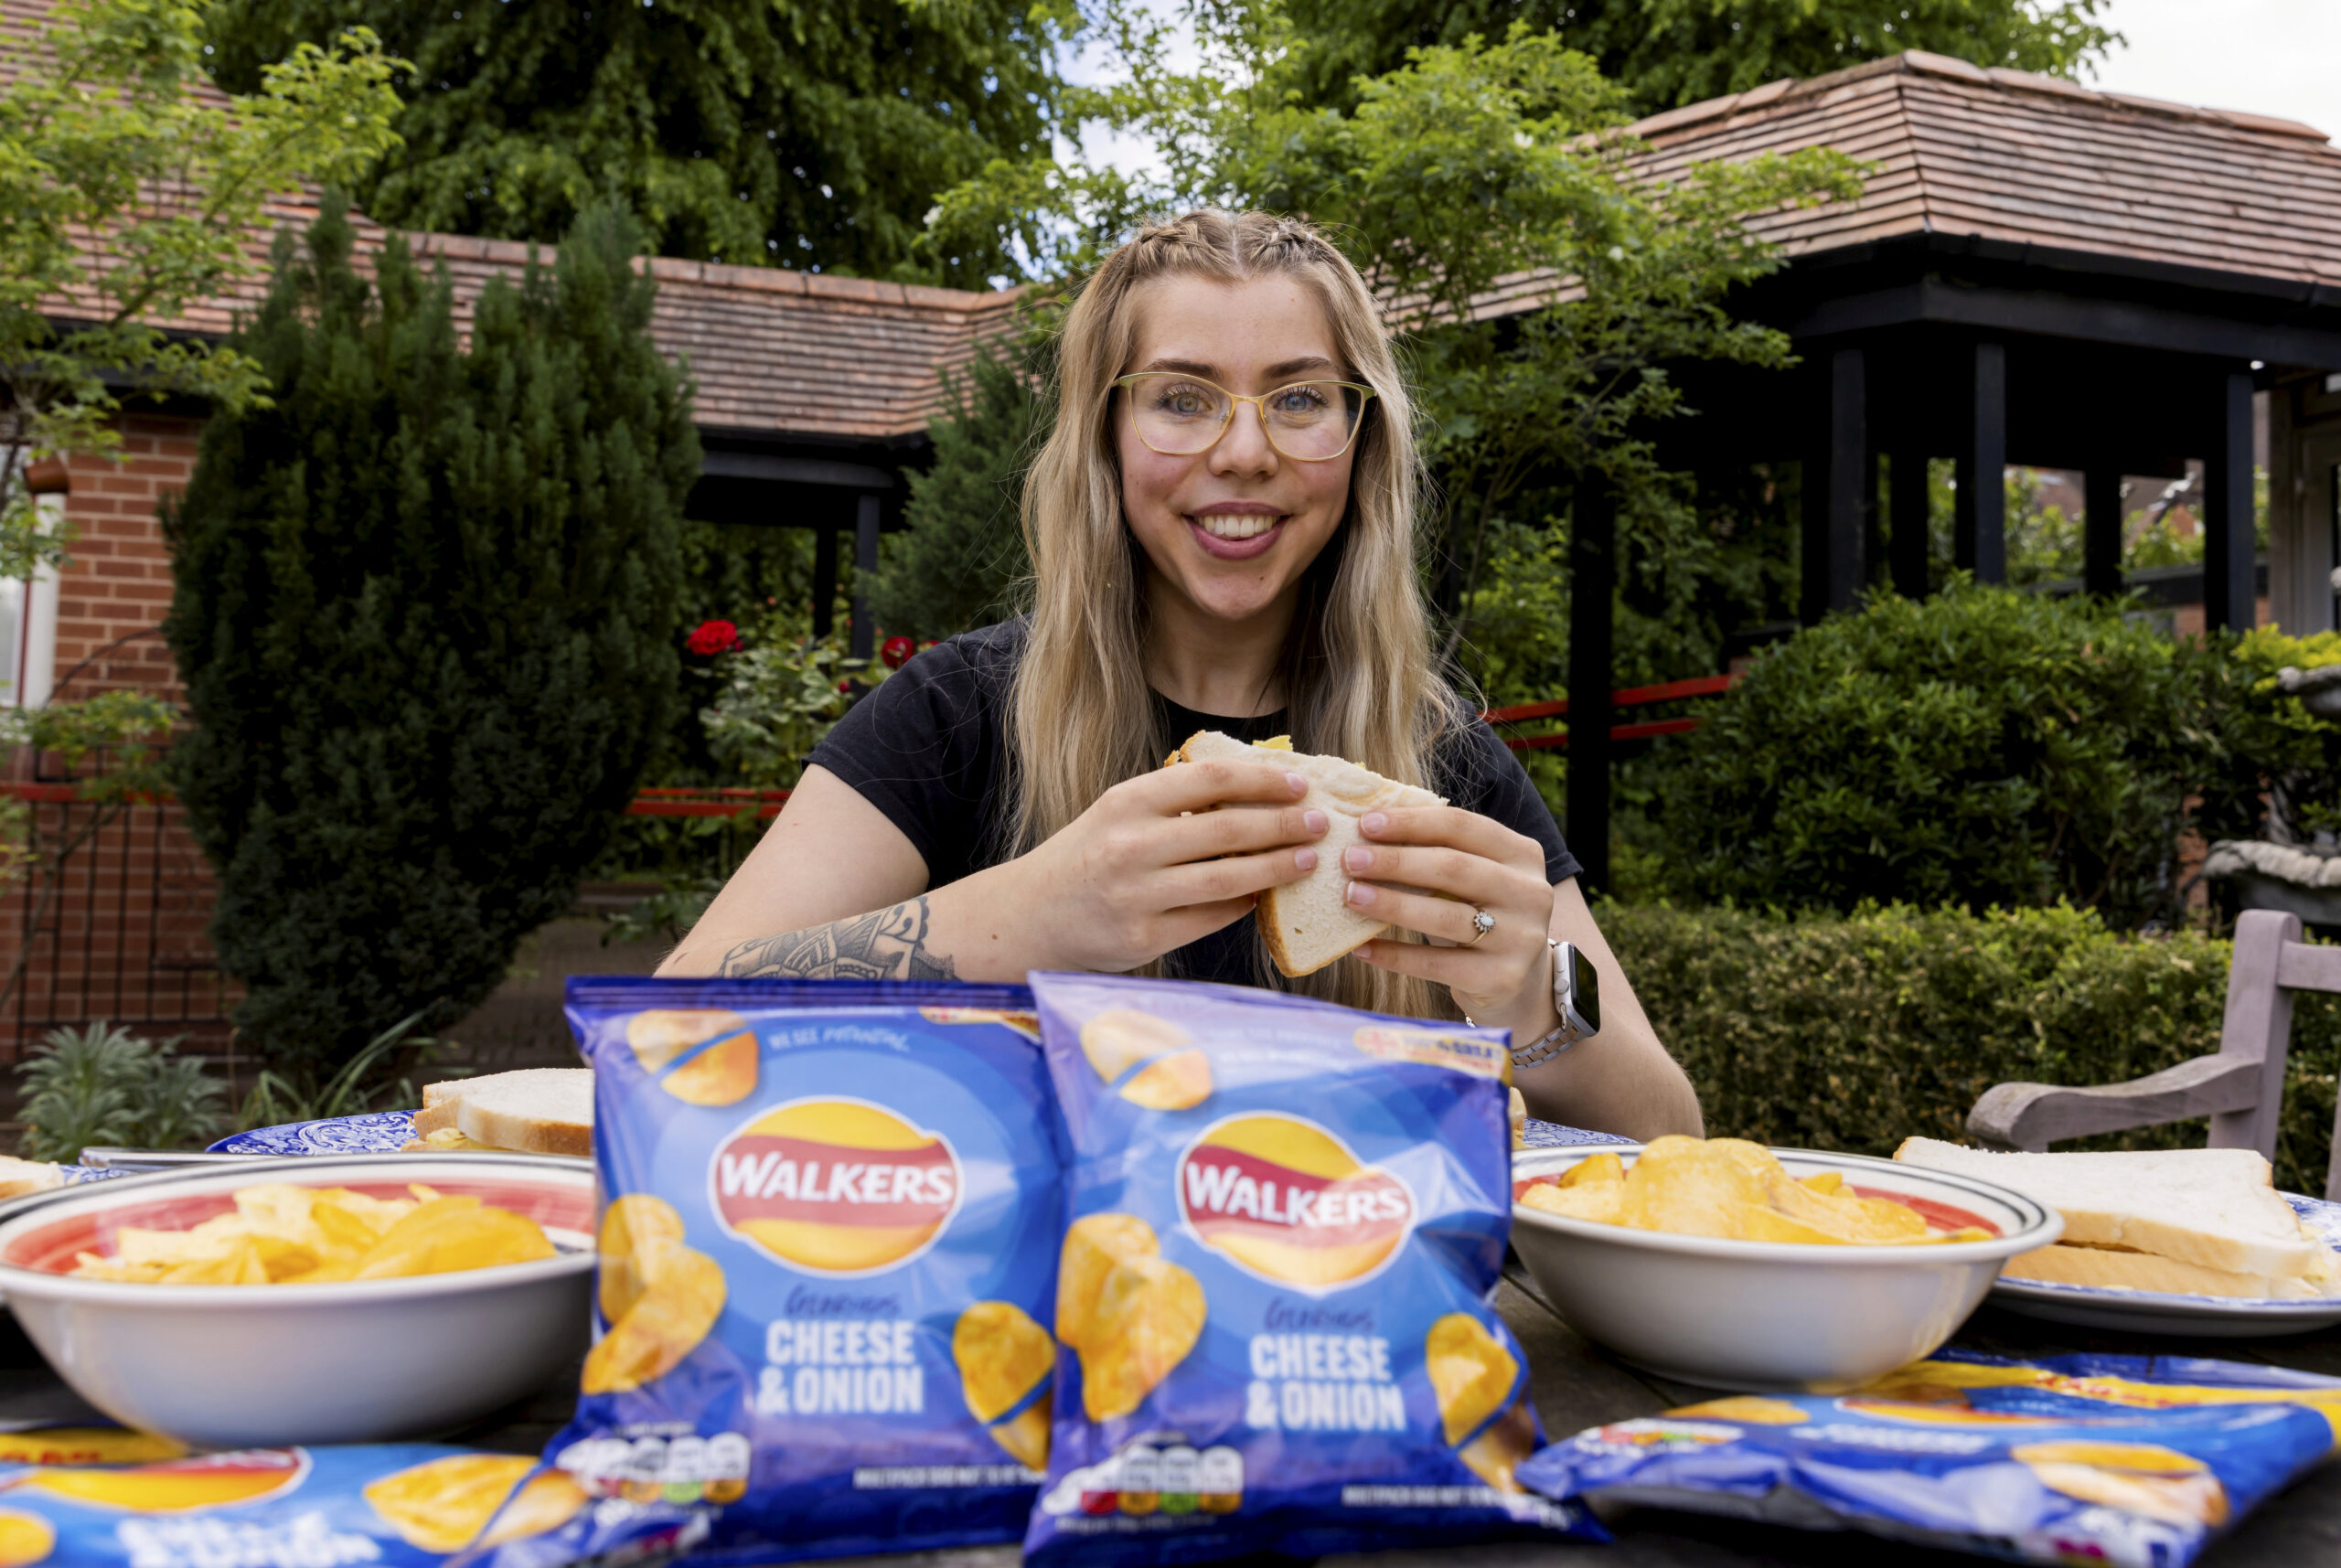 A woman who lived on a diet of cheese and onion CRISP SANDWICHES for 23 years has finally eaten a proper meal – after being hypnotised. (Leila Coker/Zenger)